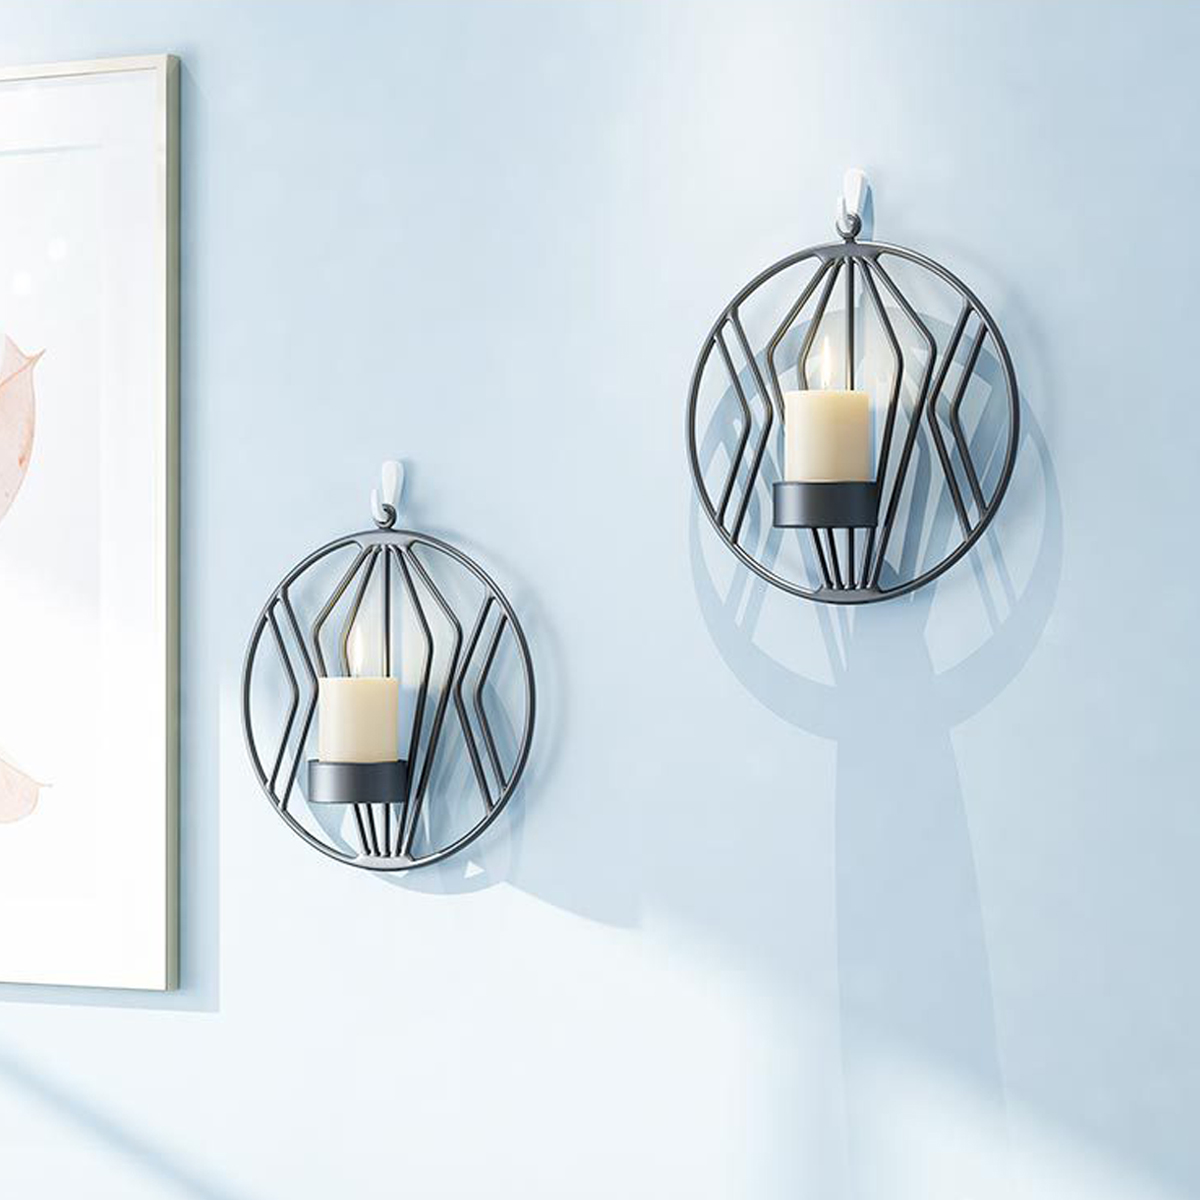 3D-Geometric-Candlestick-Iron-Wall-Candle-Holder-Sconce-Warm-Home-Party-Decor-1727945-5